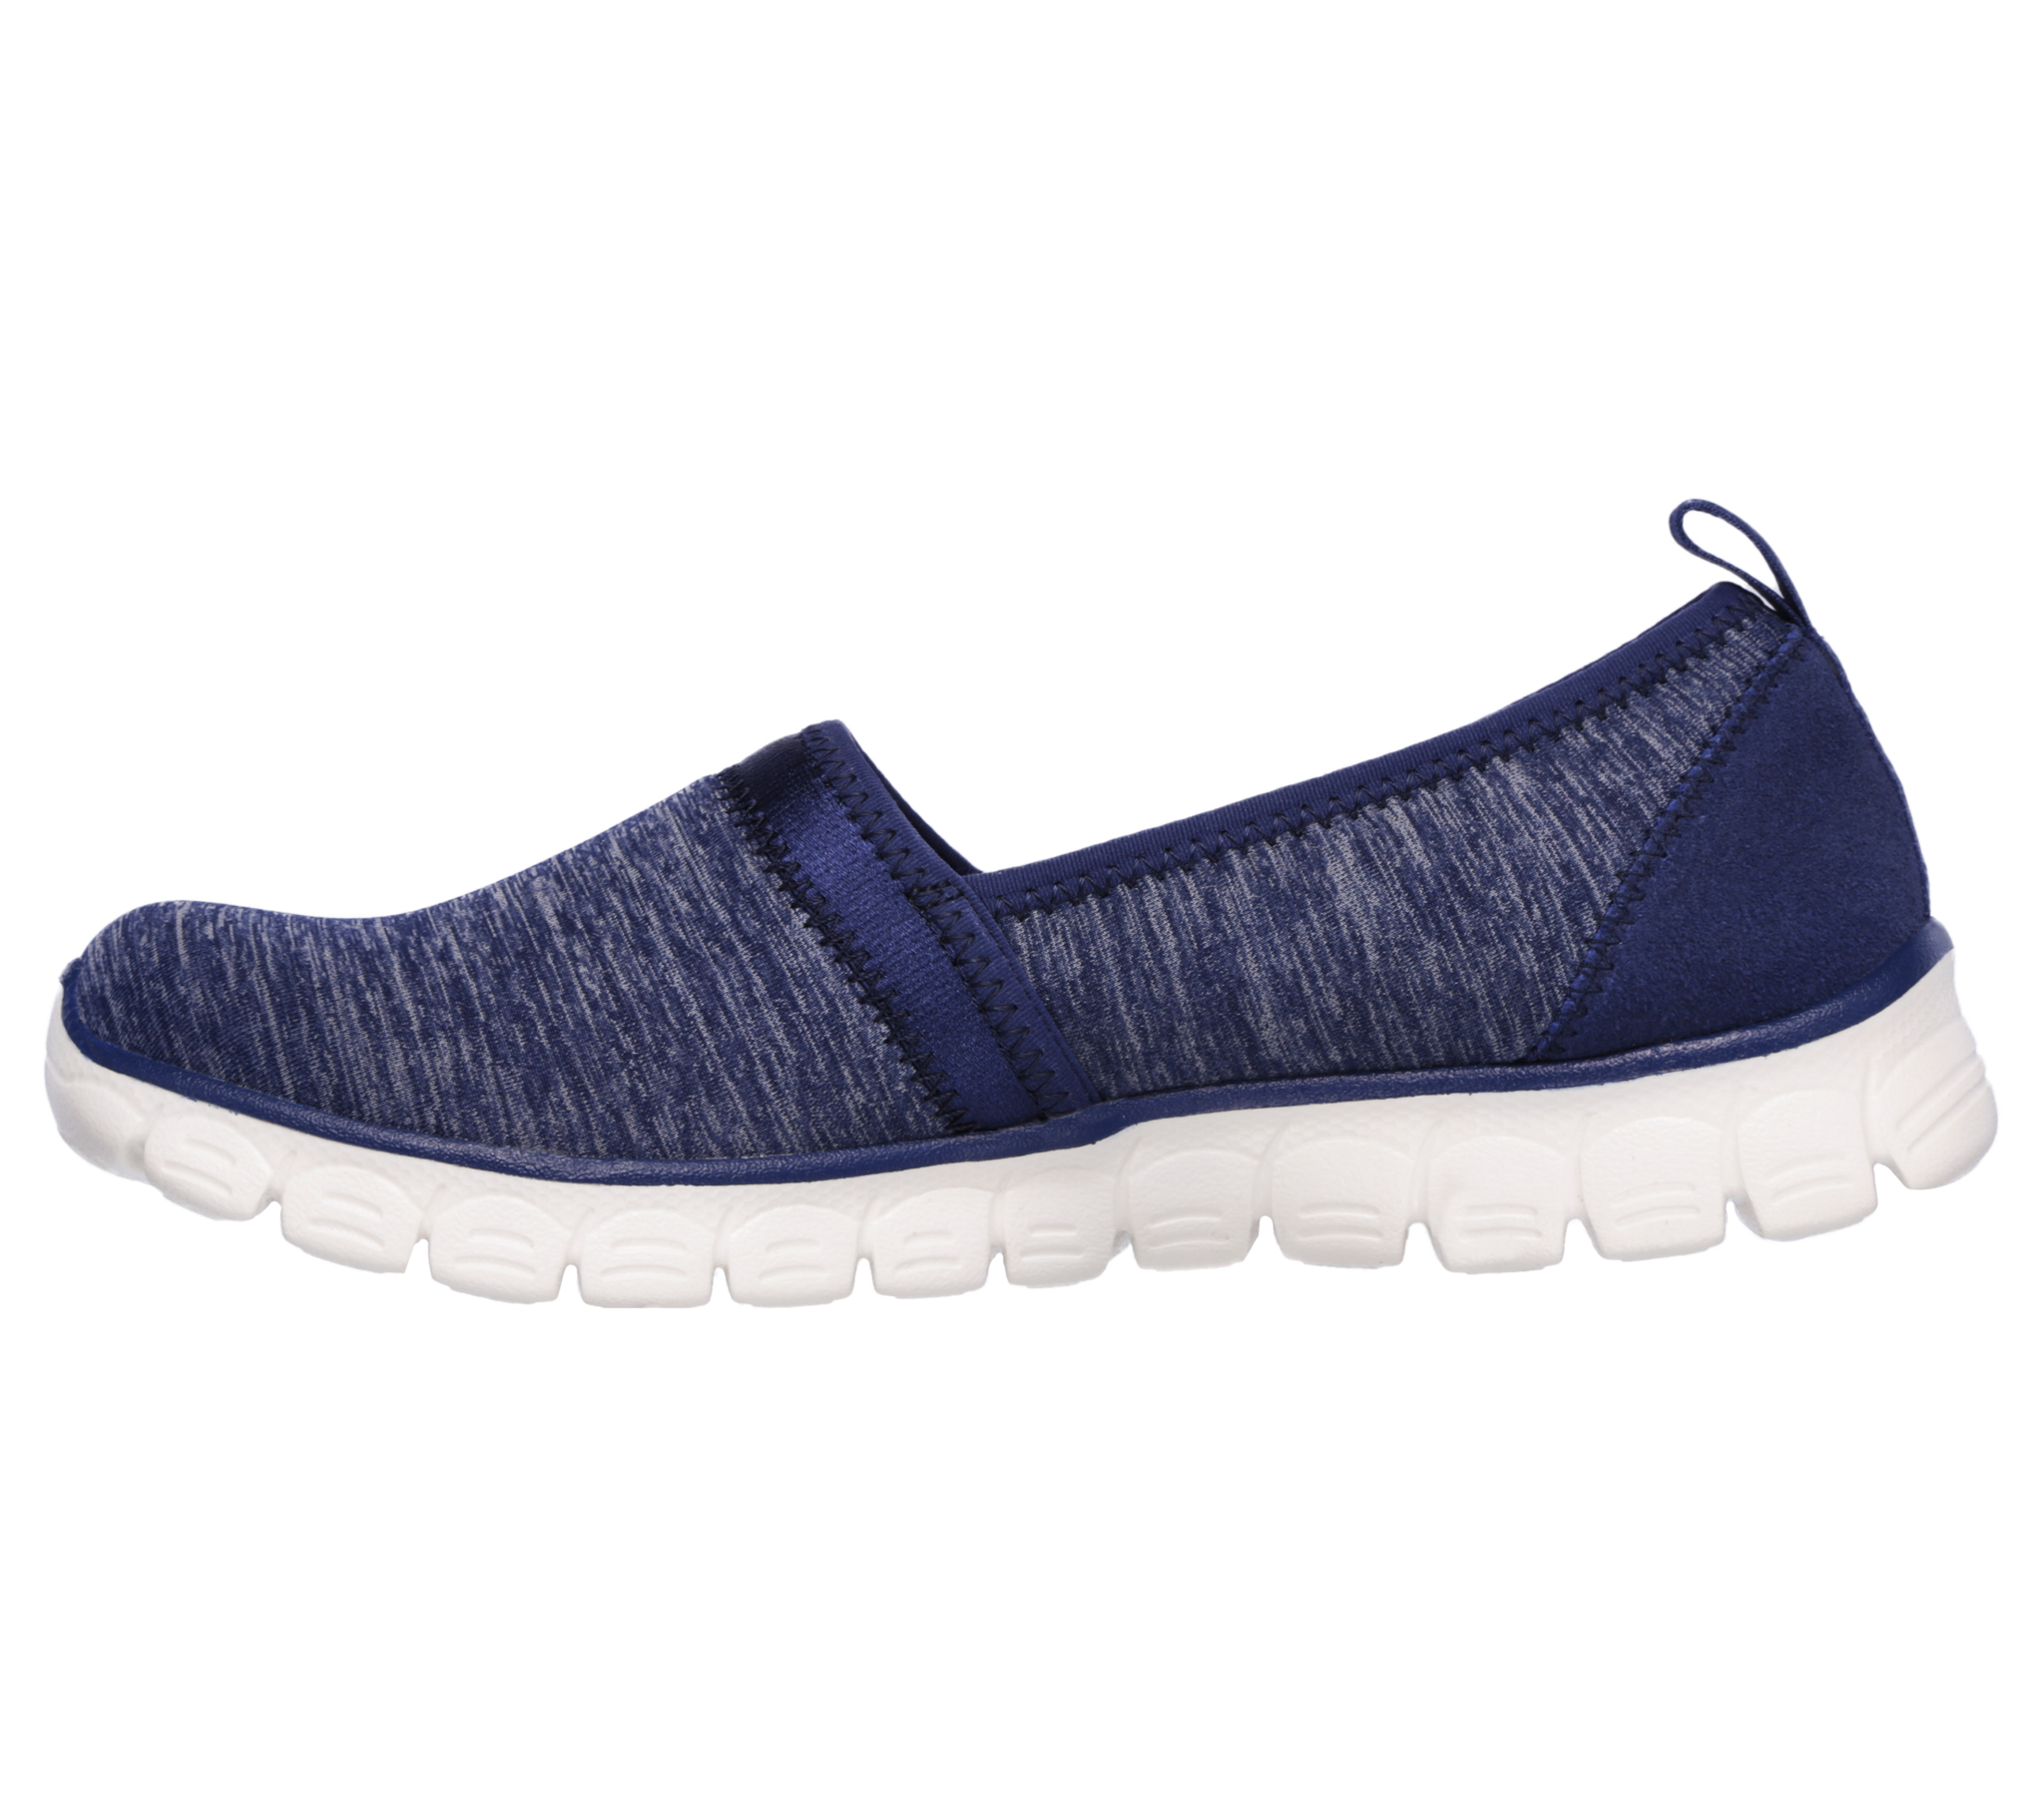 Giày nữ Skechers 23443-LIFESTYLE-NVY